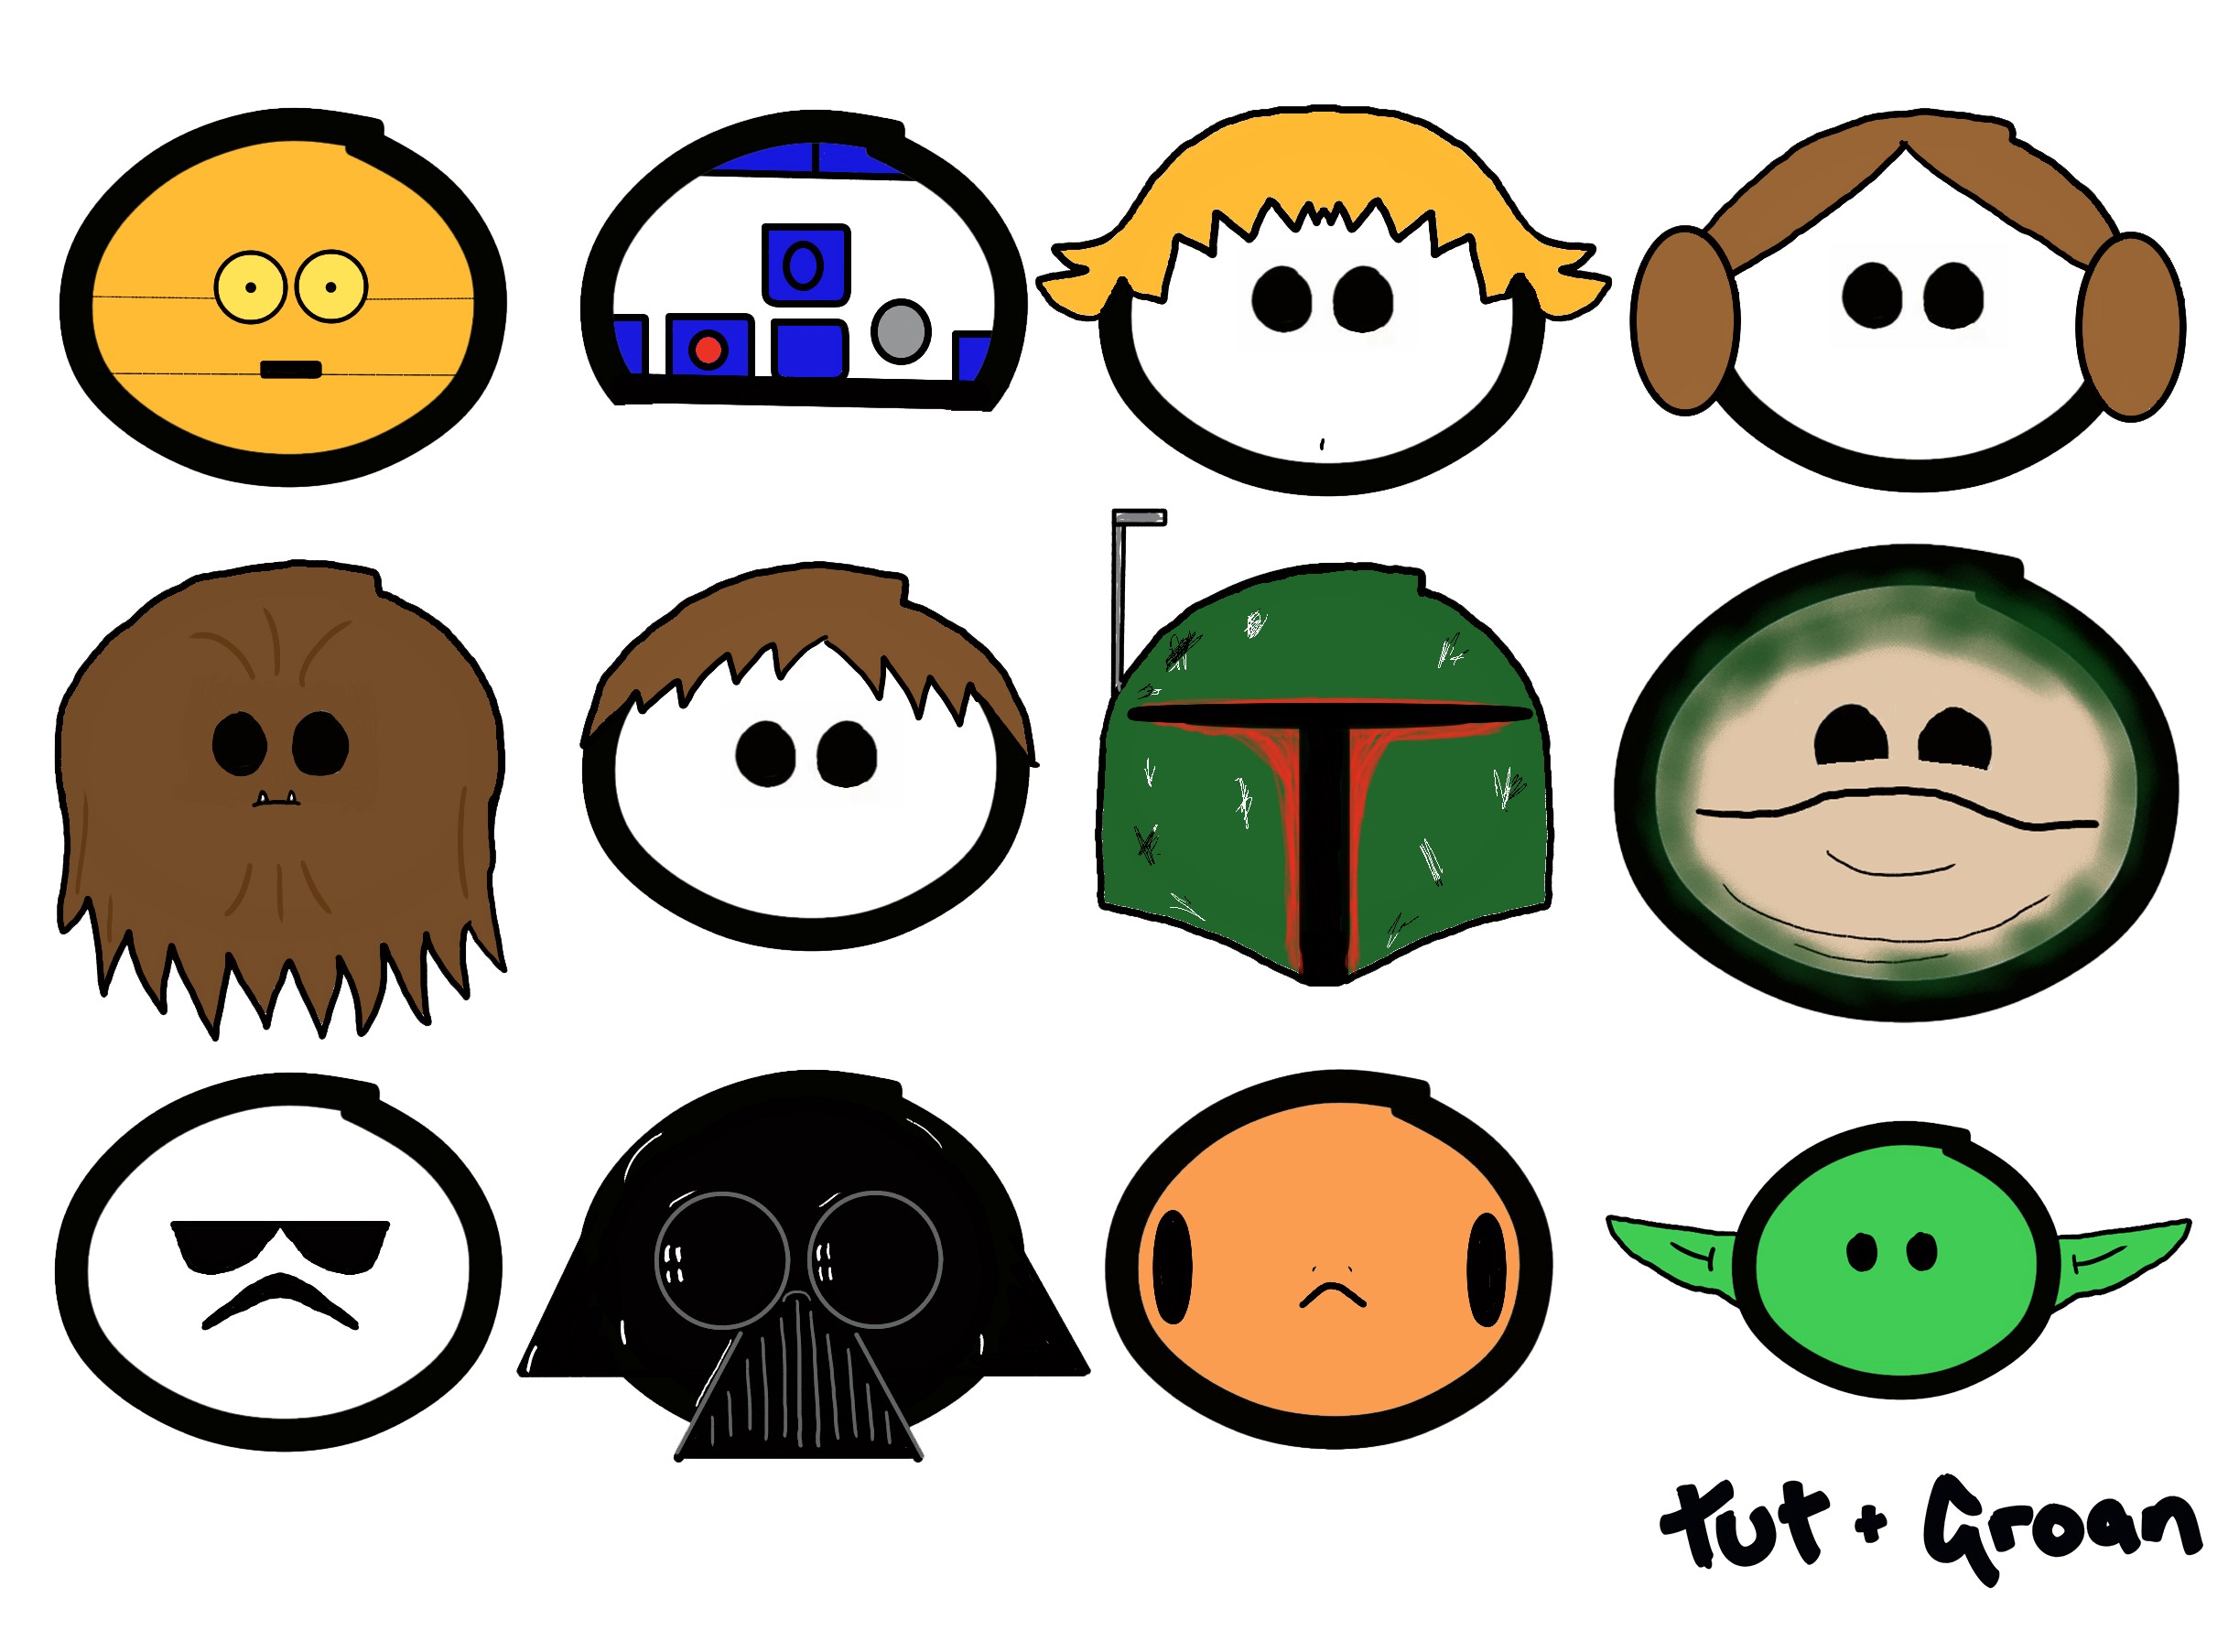 Tut and Groan Star Wars Faces cartoon